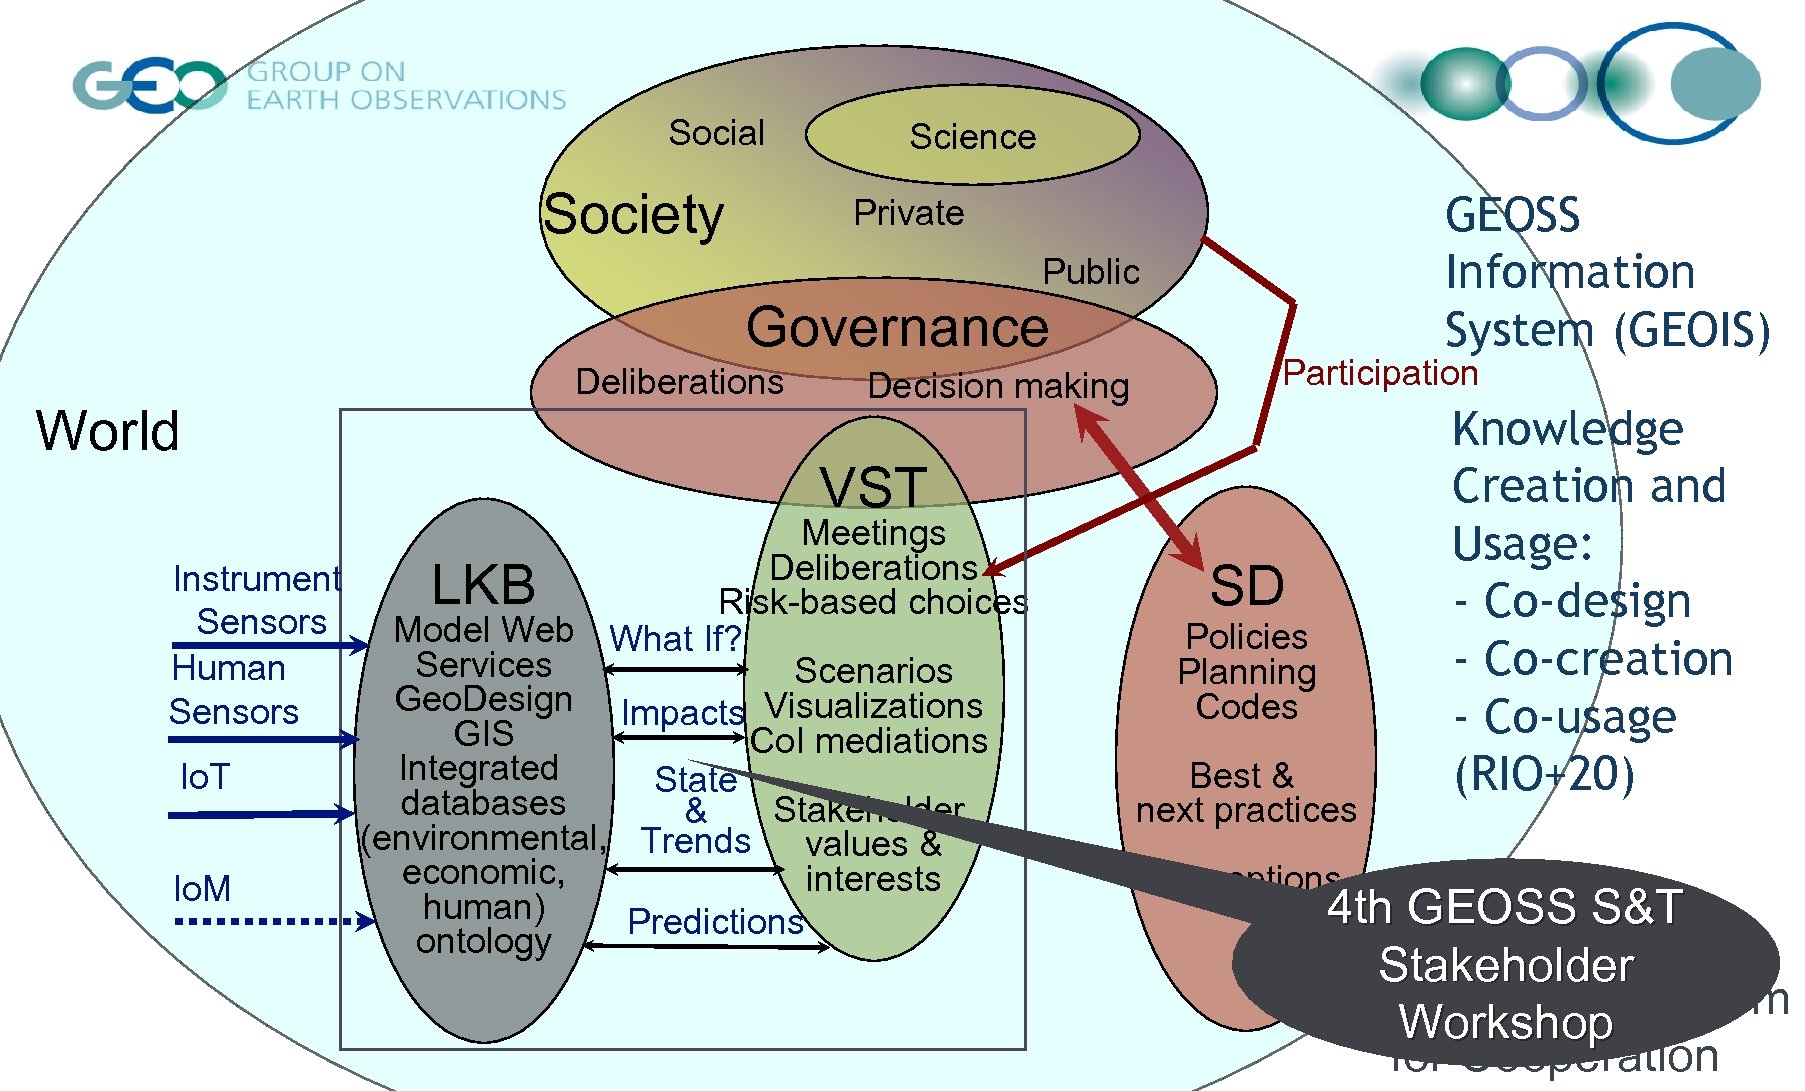 Social Society Science GEOSS Information System (GEOIS) Private Public Governance World Deliberations Decision making